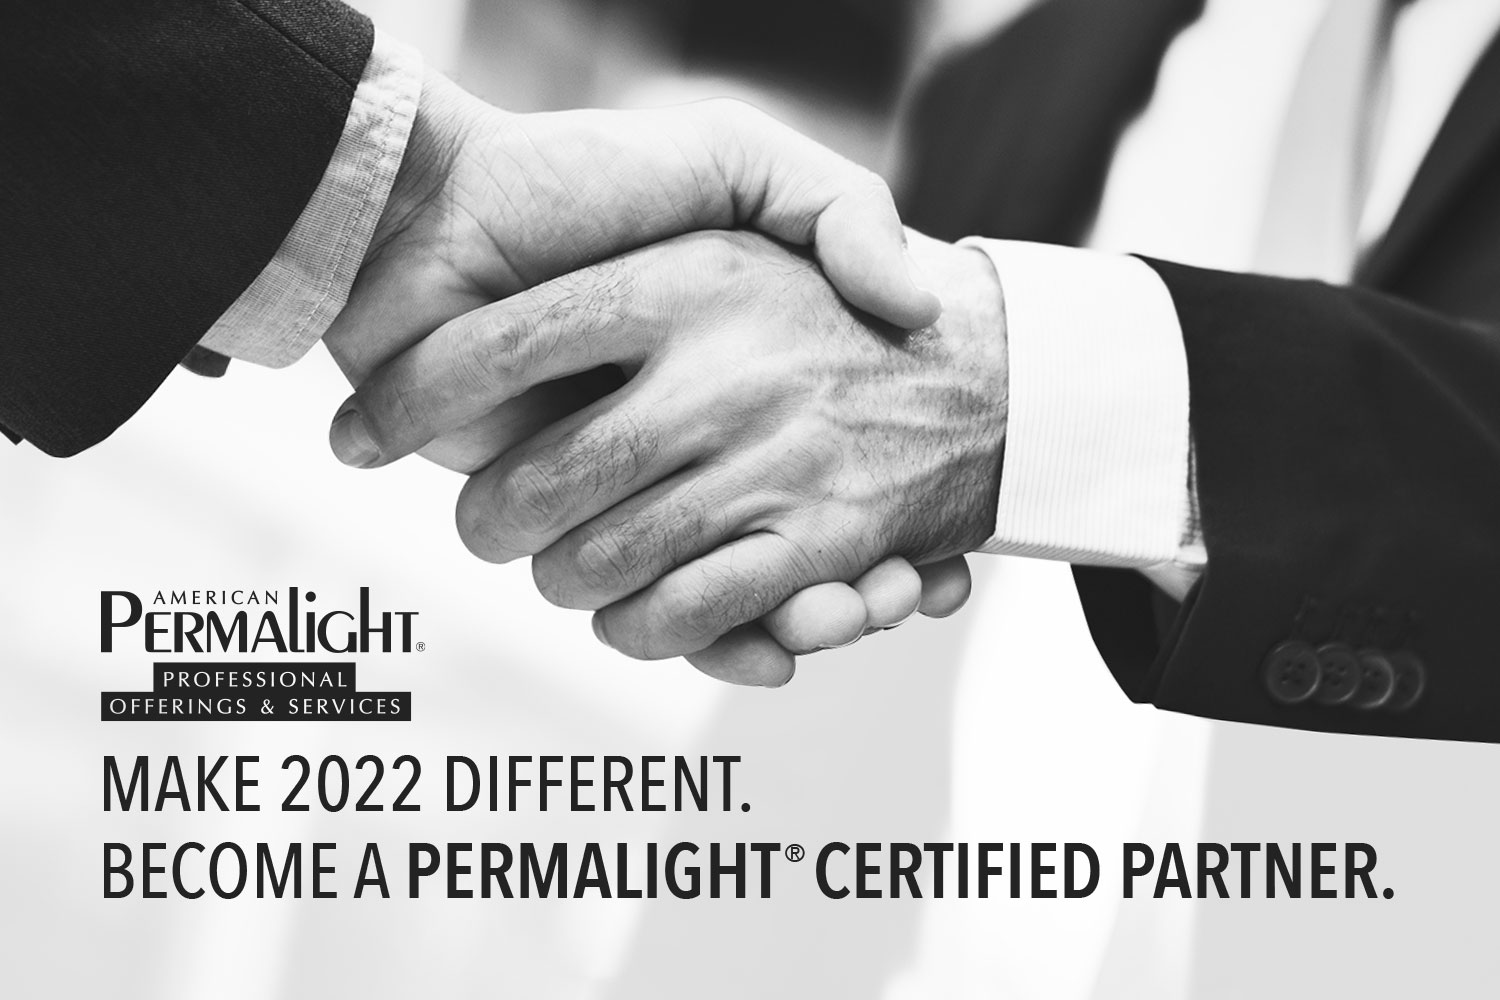 Become a PERMALIGHT® Certified Partner in 2022